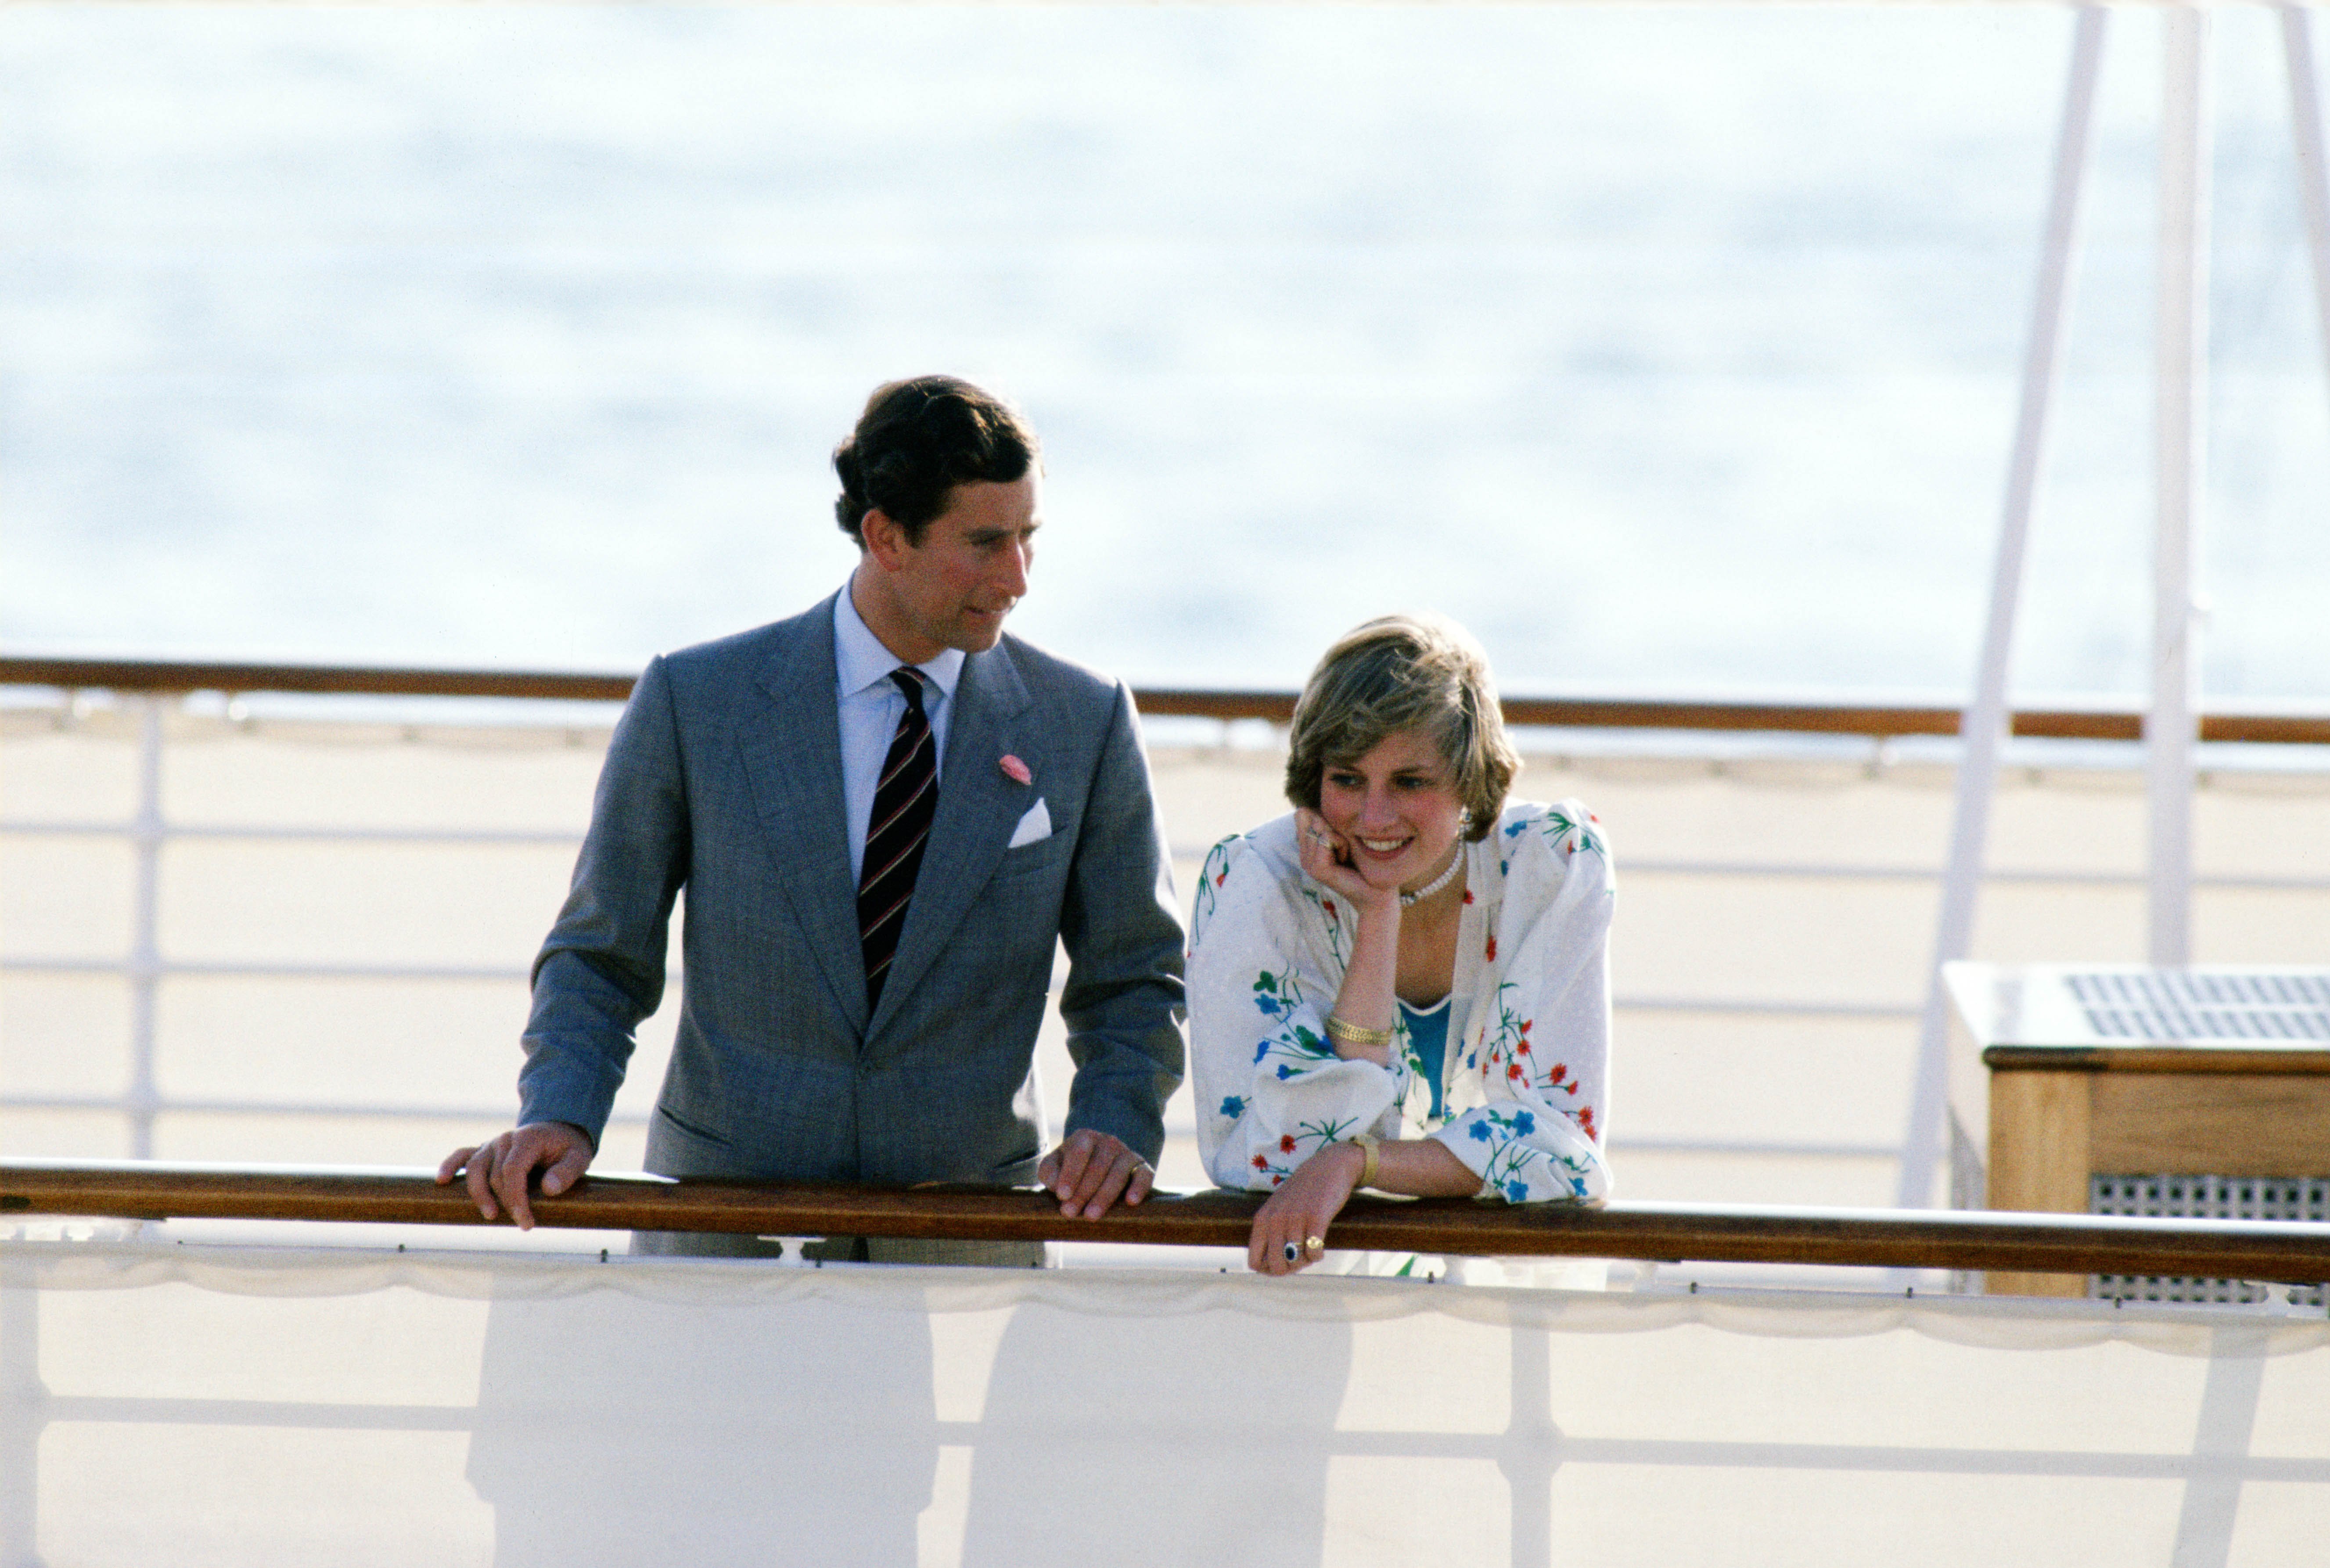 Prince Charles and Princess Diana aboard the Royal Yacht Britannia at the start of their honeymoon cruise